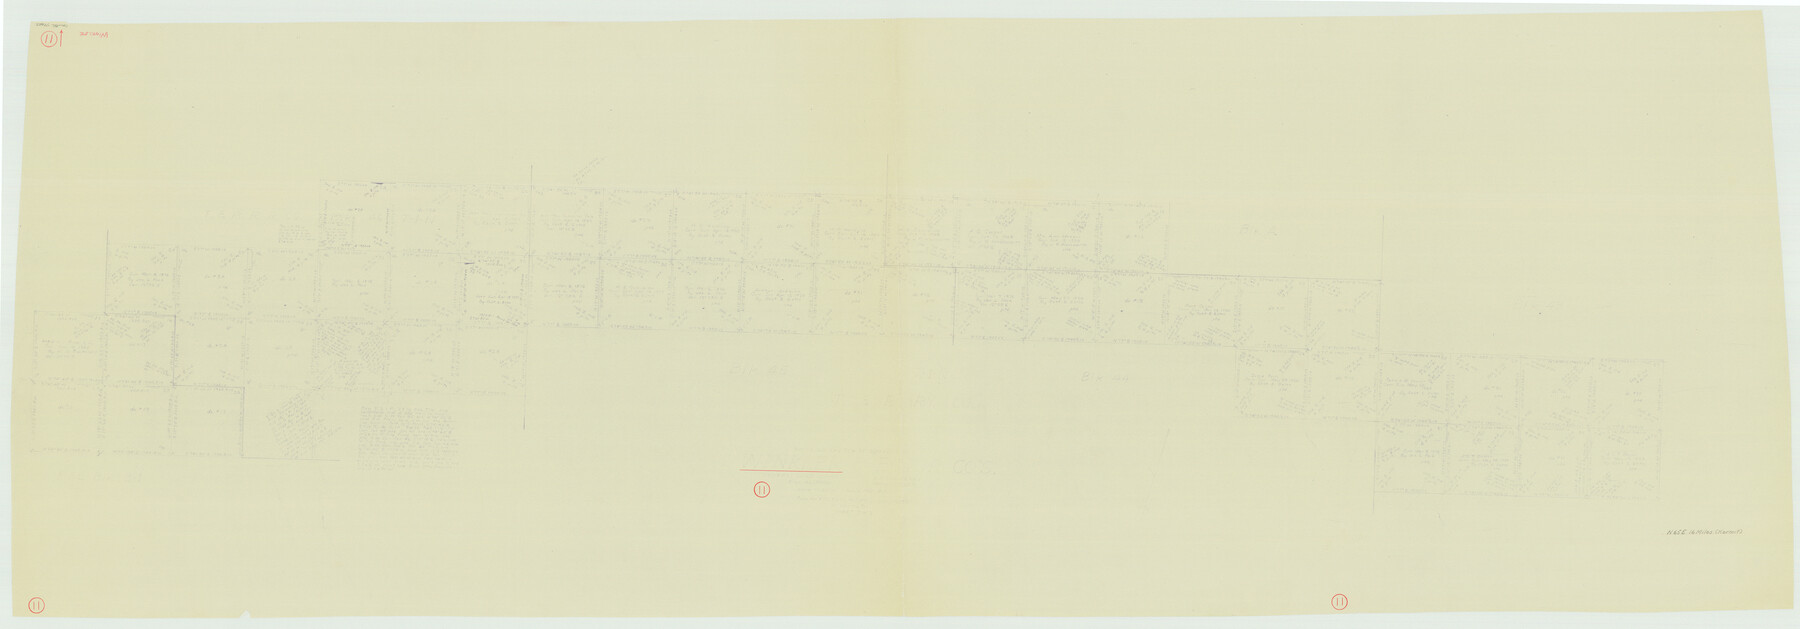 72605, Winkler County Working Sketch 11, General Map Collection